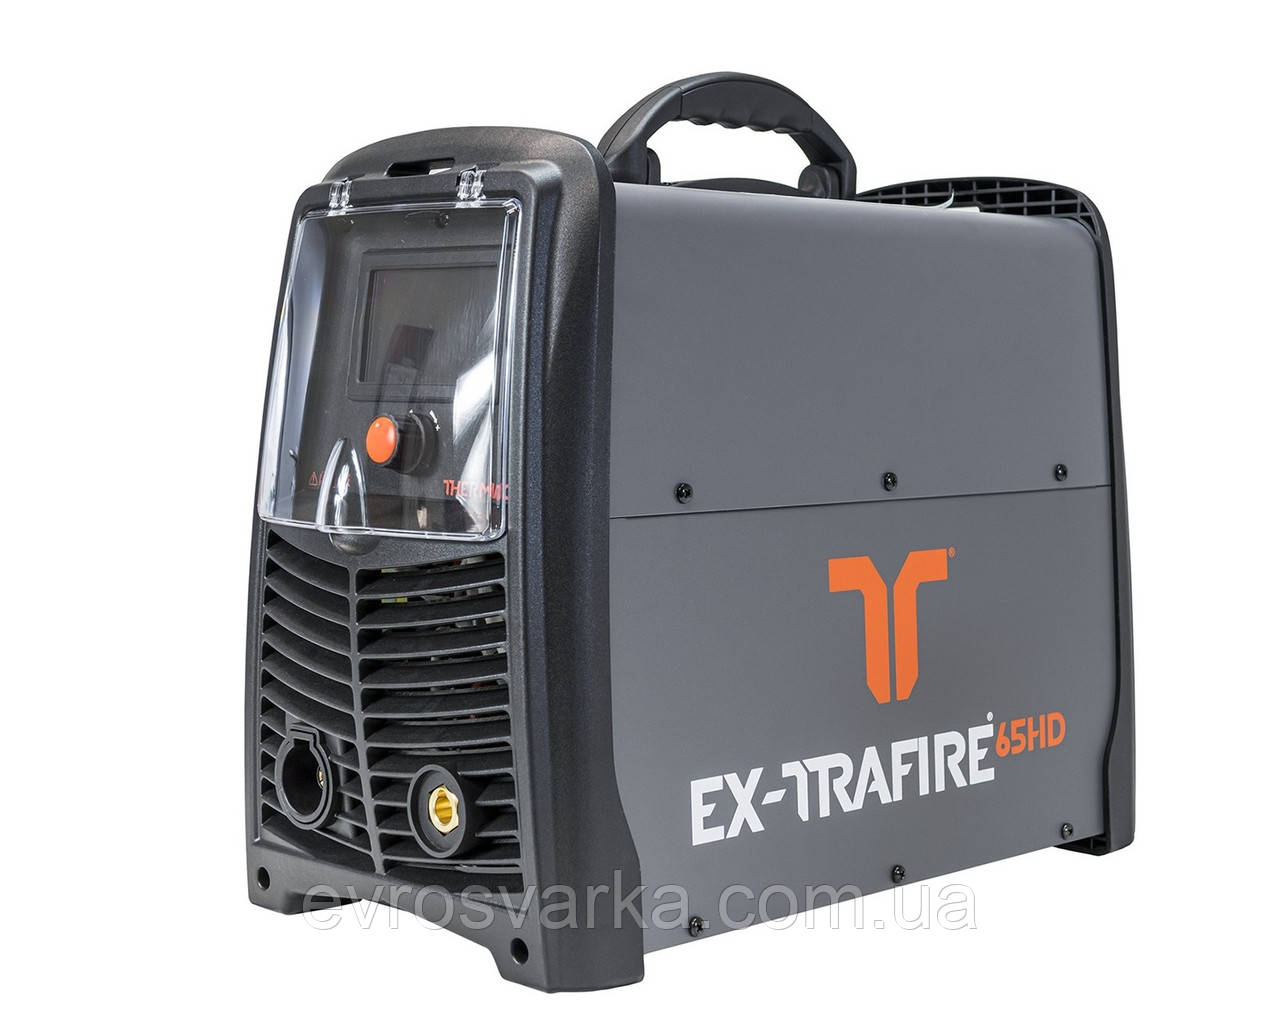 THERMACUT EX-TRAFIRE 65 HD